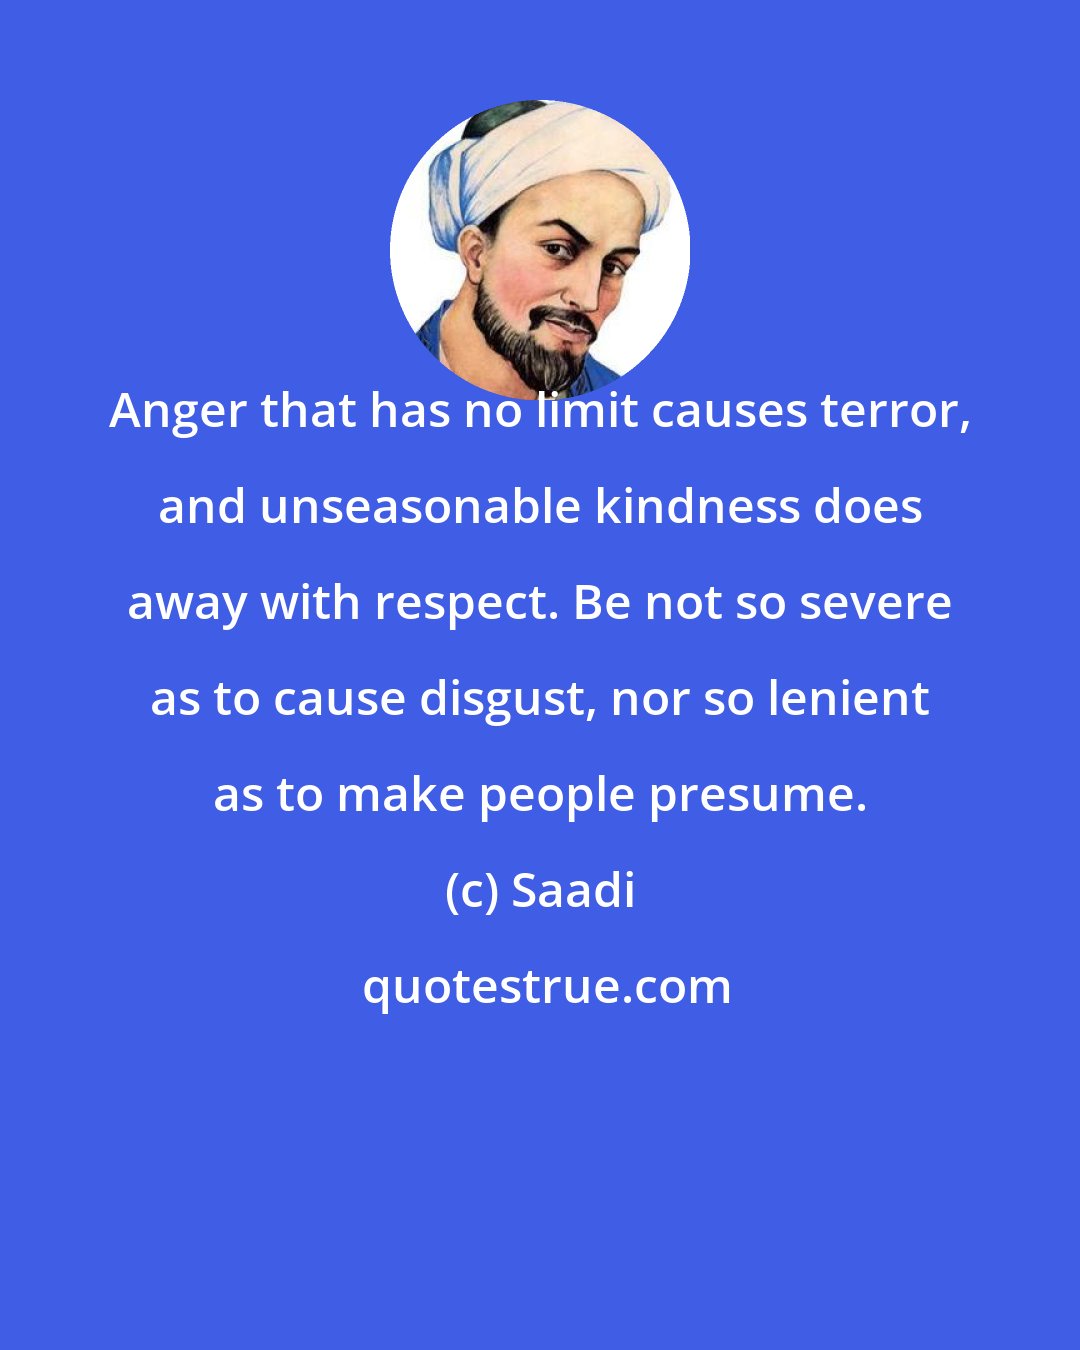 Saadi: Anger that has no limit causes terror, and unseasonable kindness does away with respect. Be not so severe as to cause disgust, nor so lenient as to make people presume.